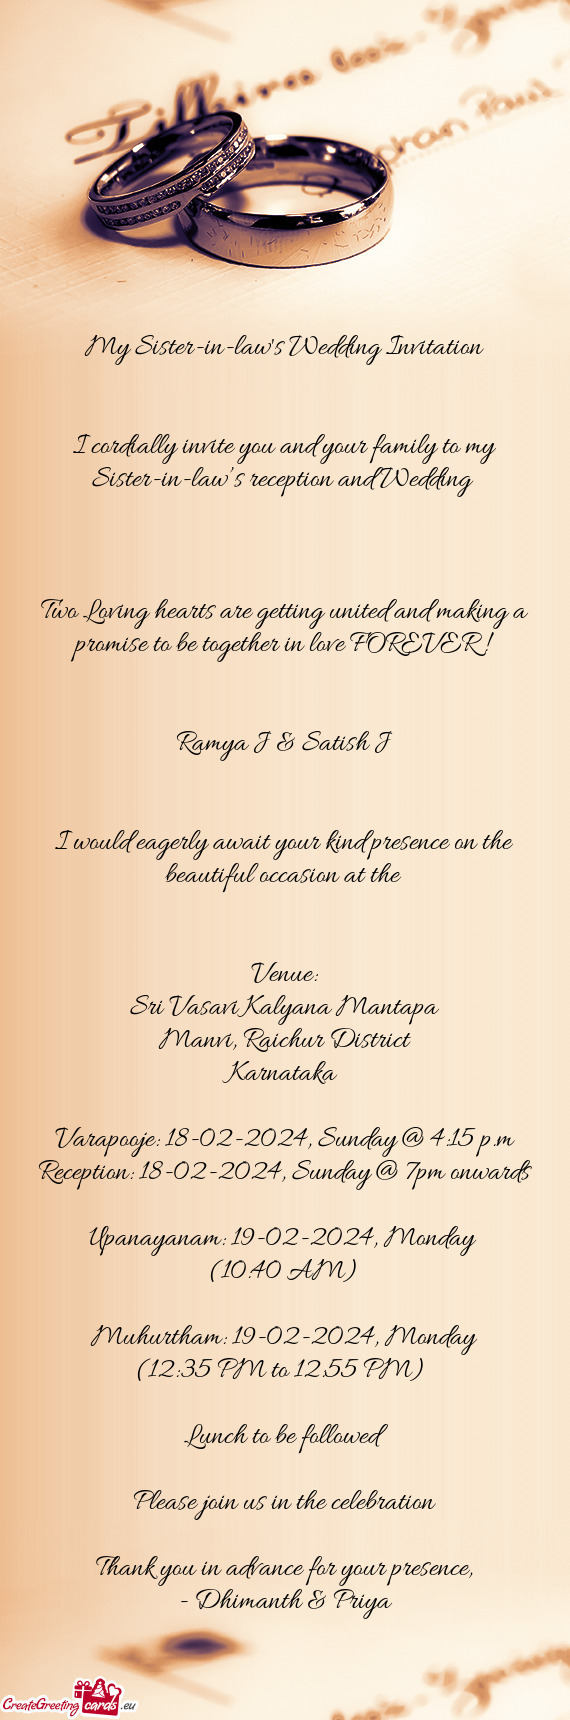 I cordially invite you and your family to my Sister-in-law’s reception and Wedding